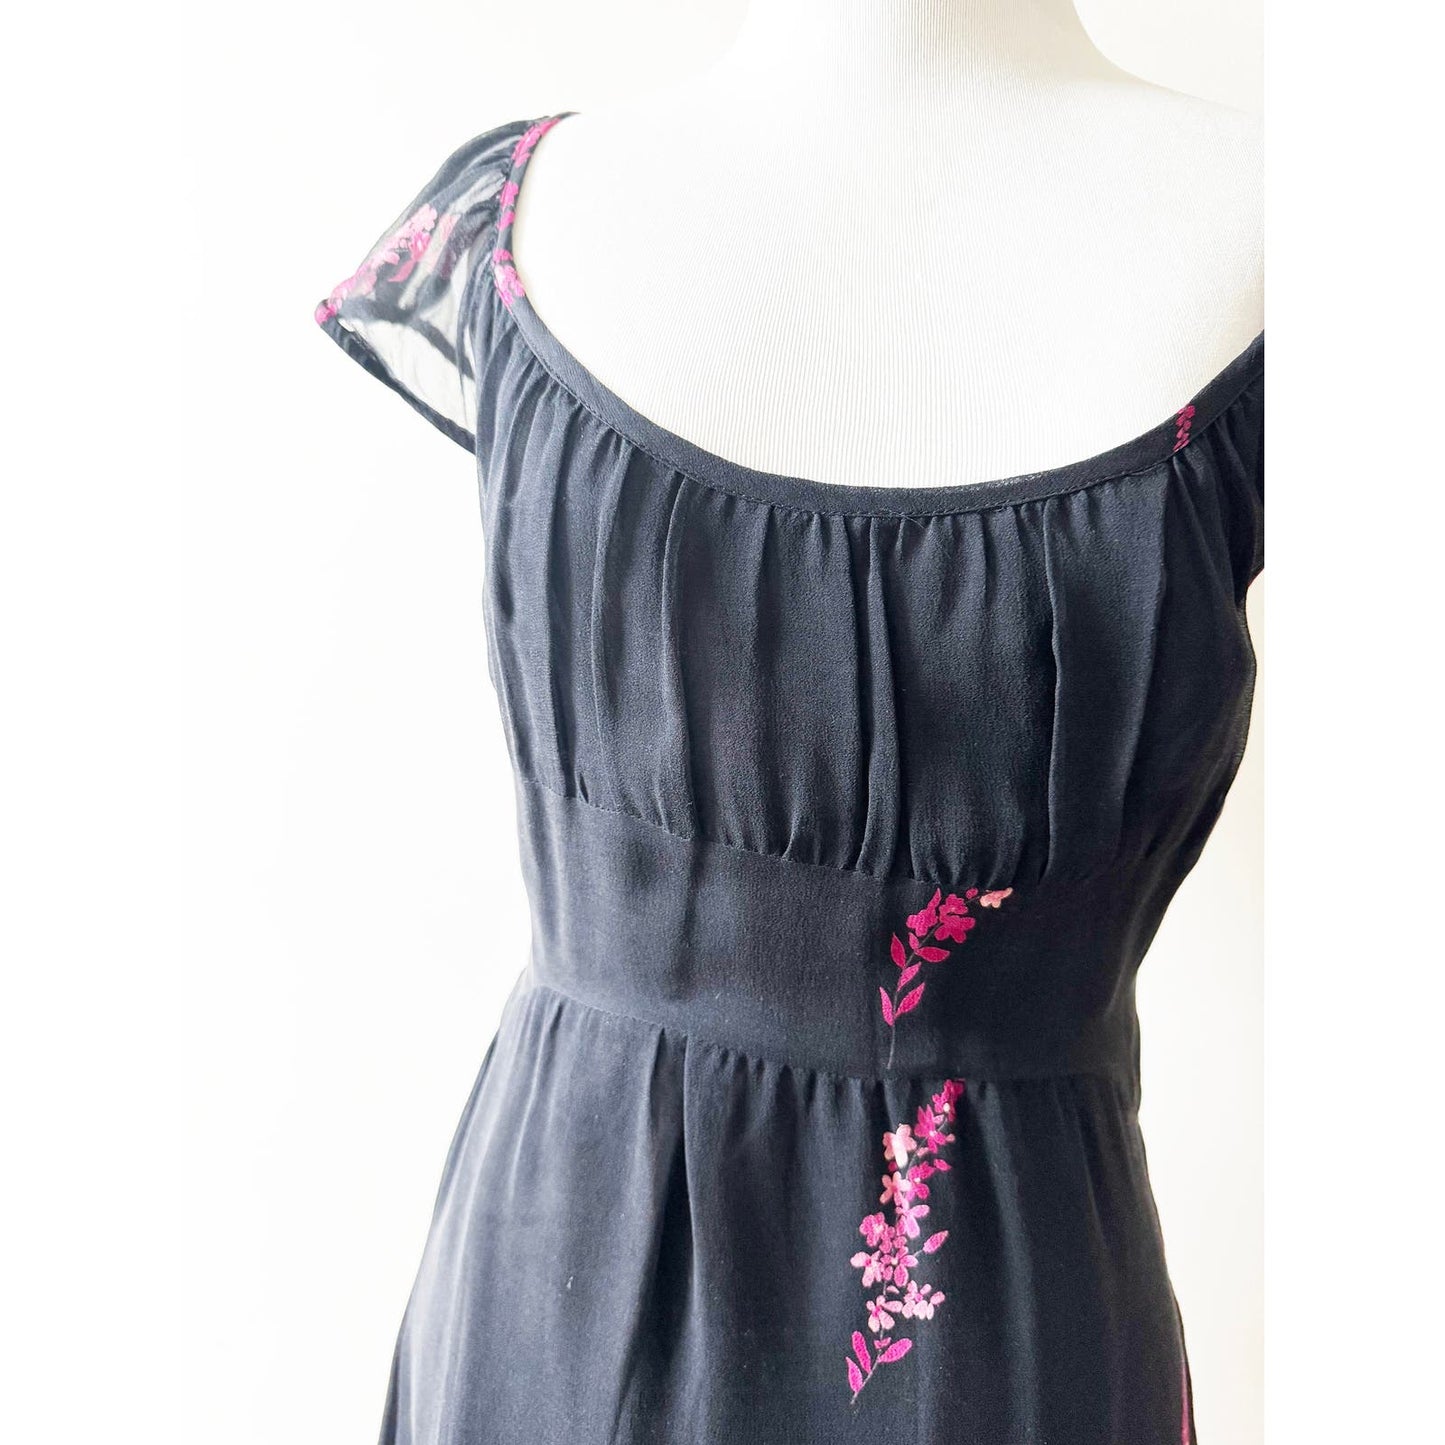 Y2k ANNA SUI Classic Black Floral Dress with Shoulder Poof | Size 2